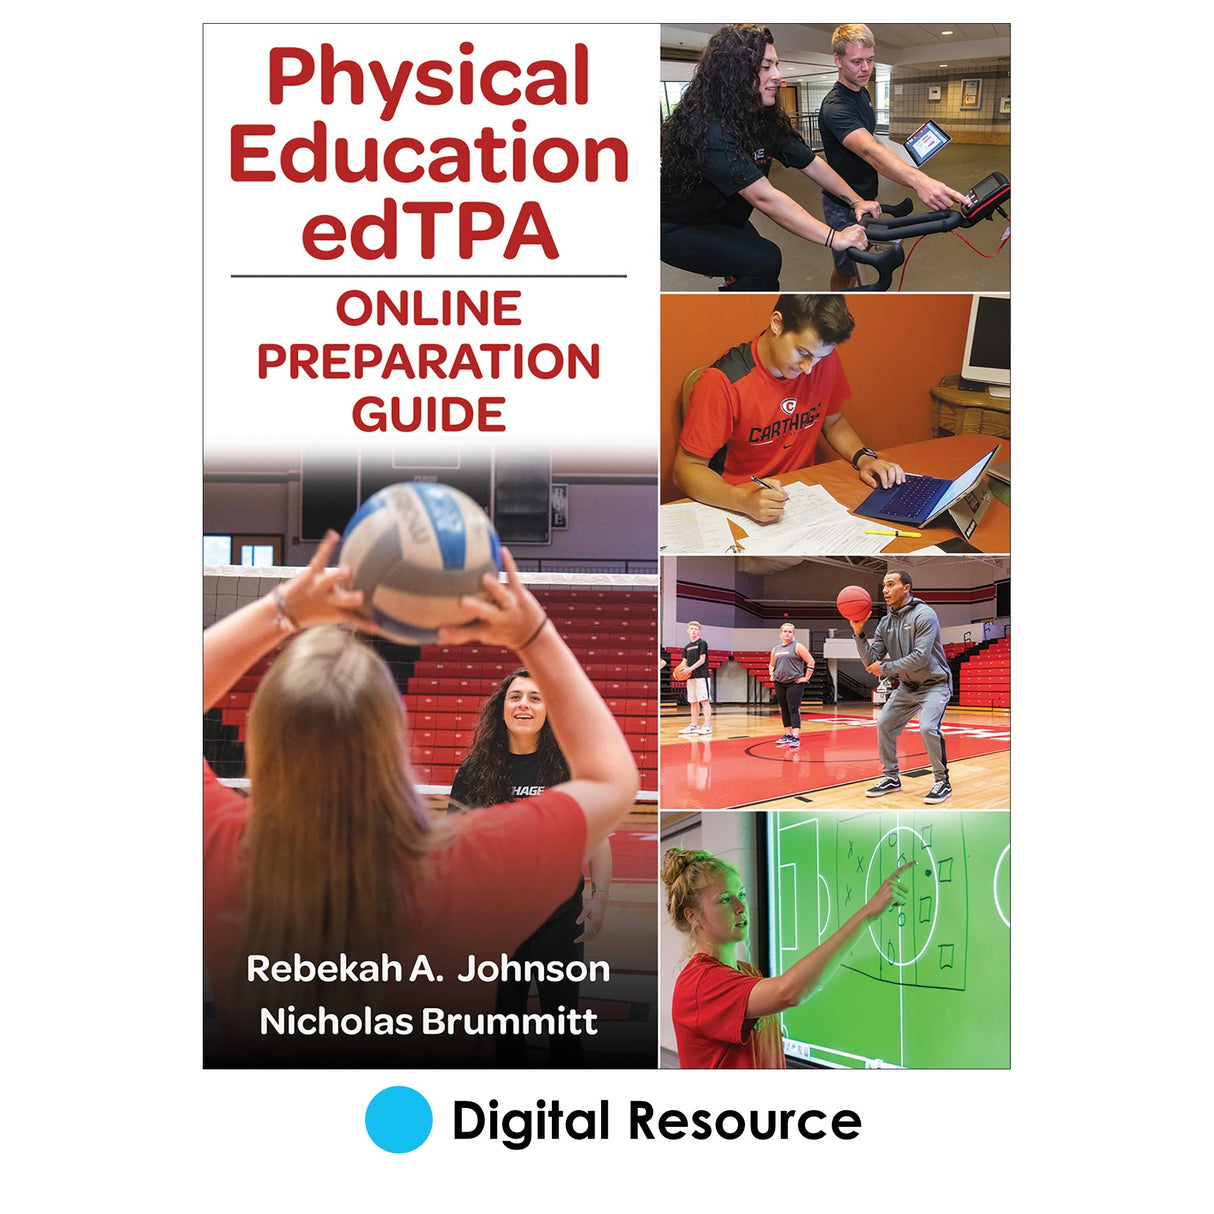 Physical Education edTPA Online Preparation Guide